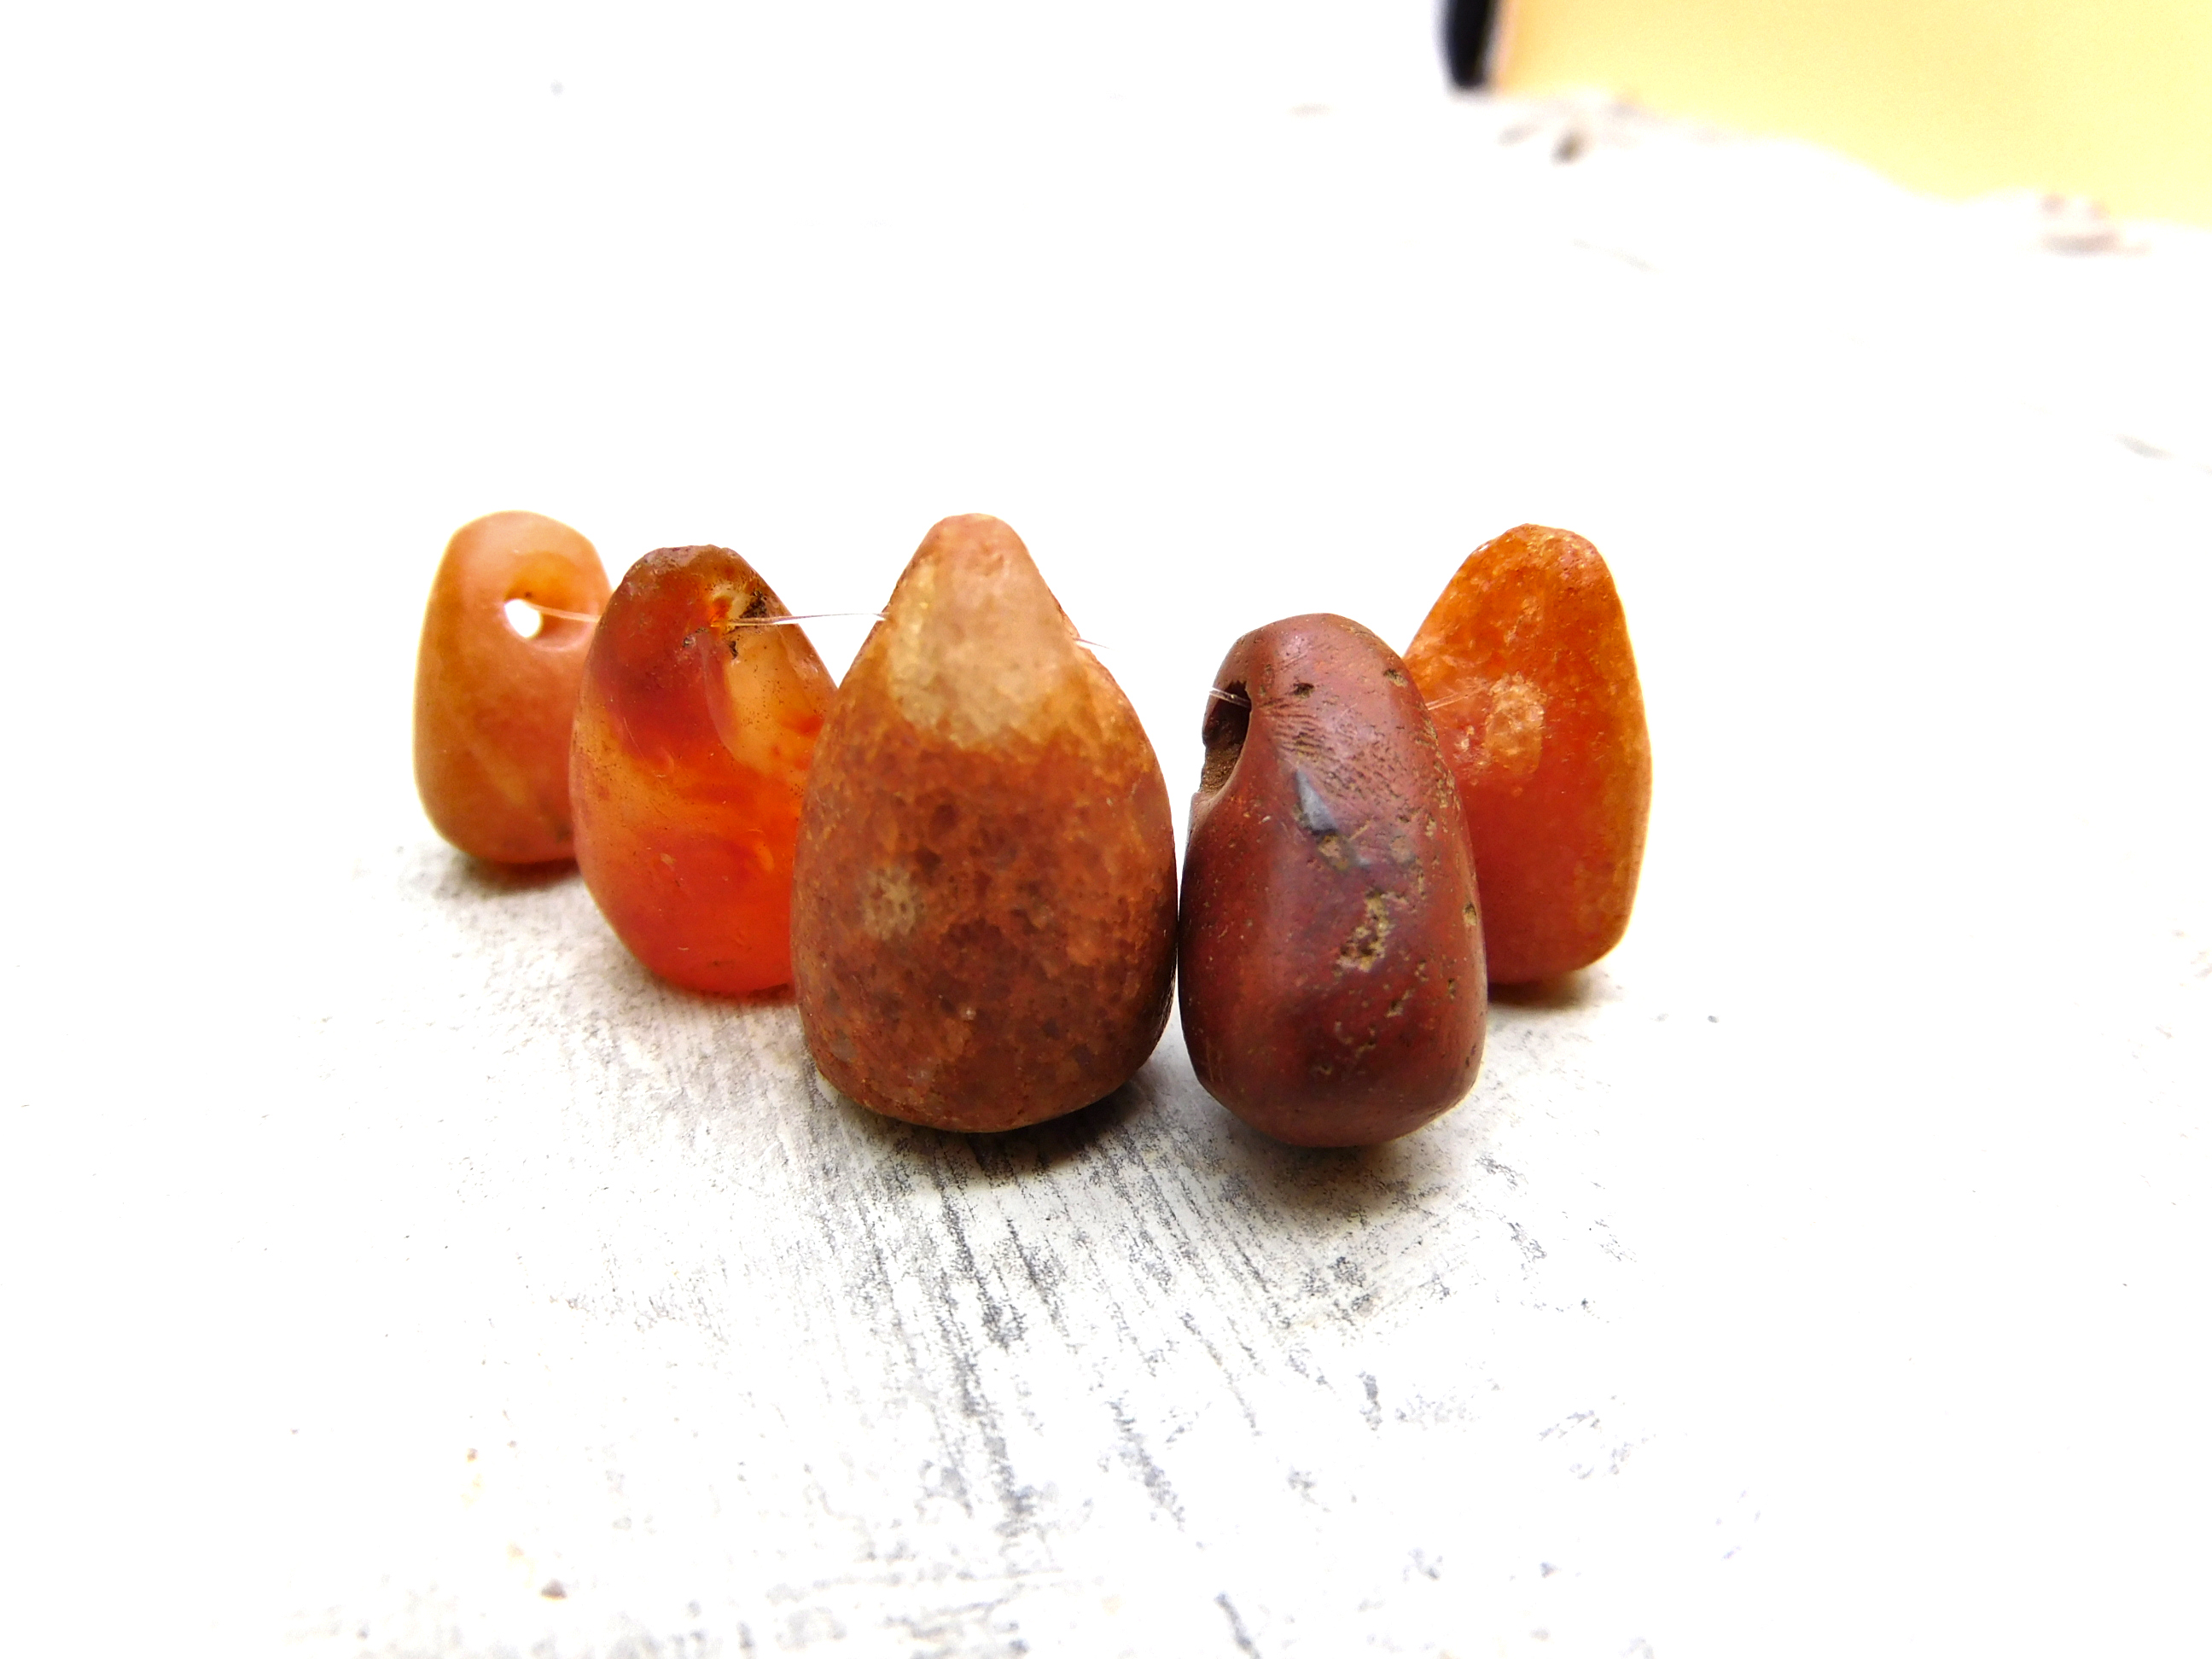 5 pendant beads from Mali - rare and old - desert stones